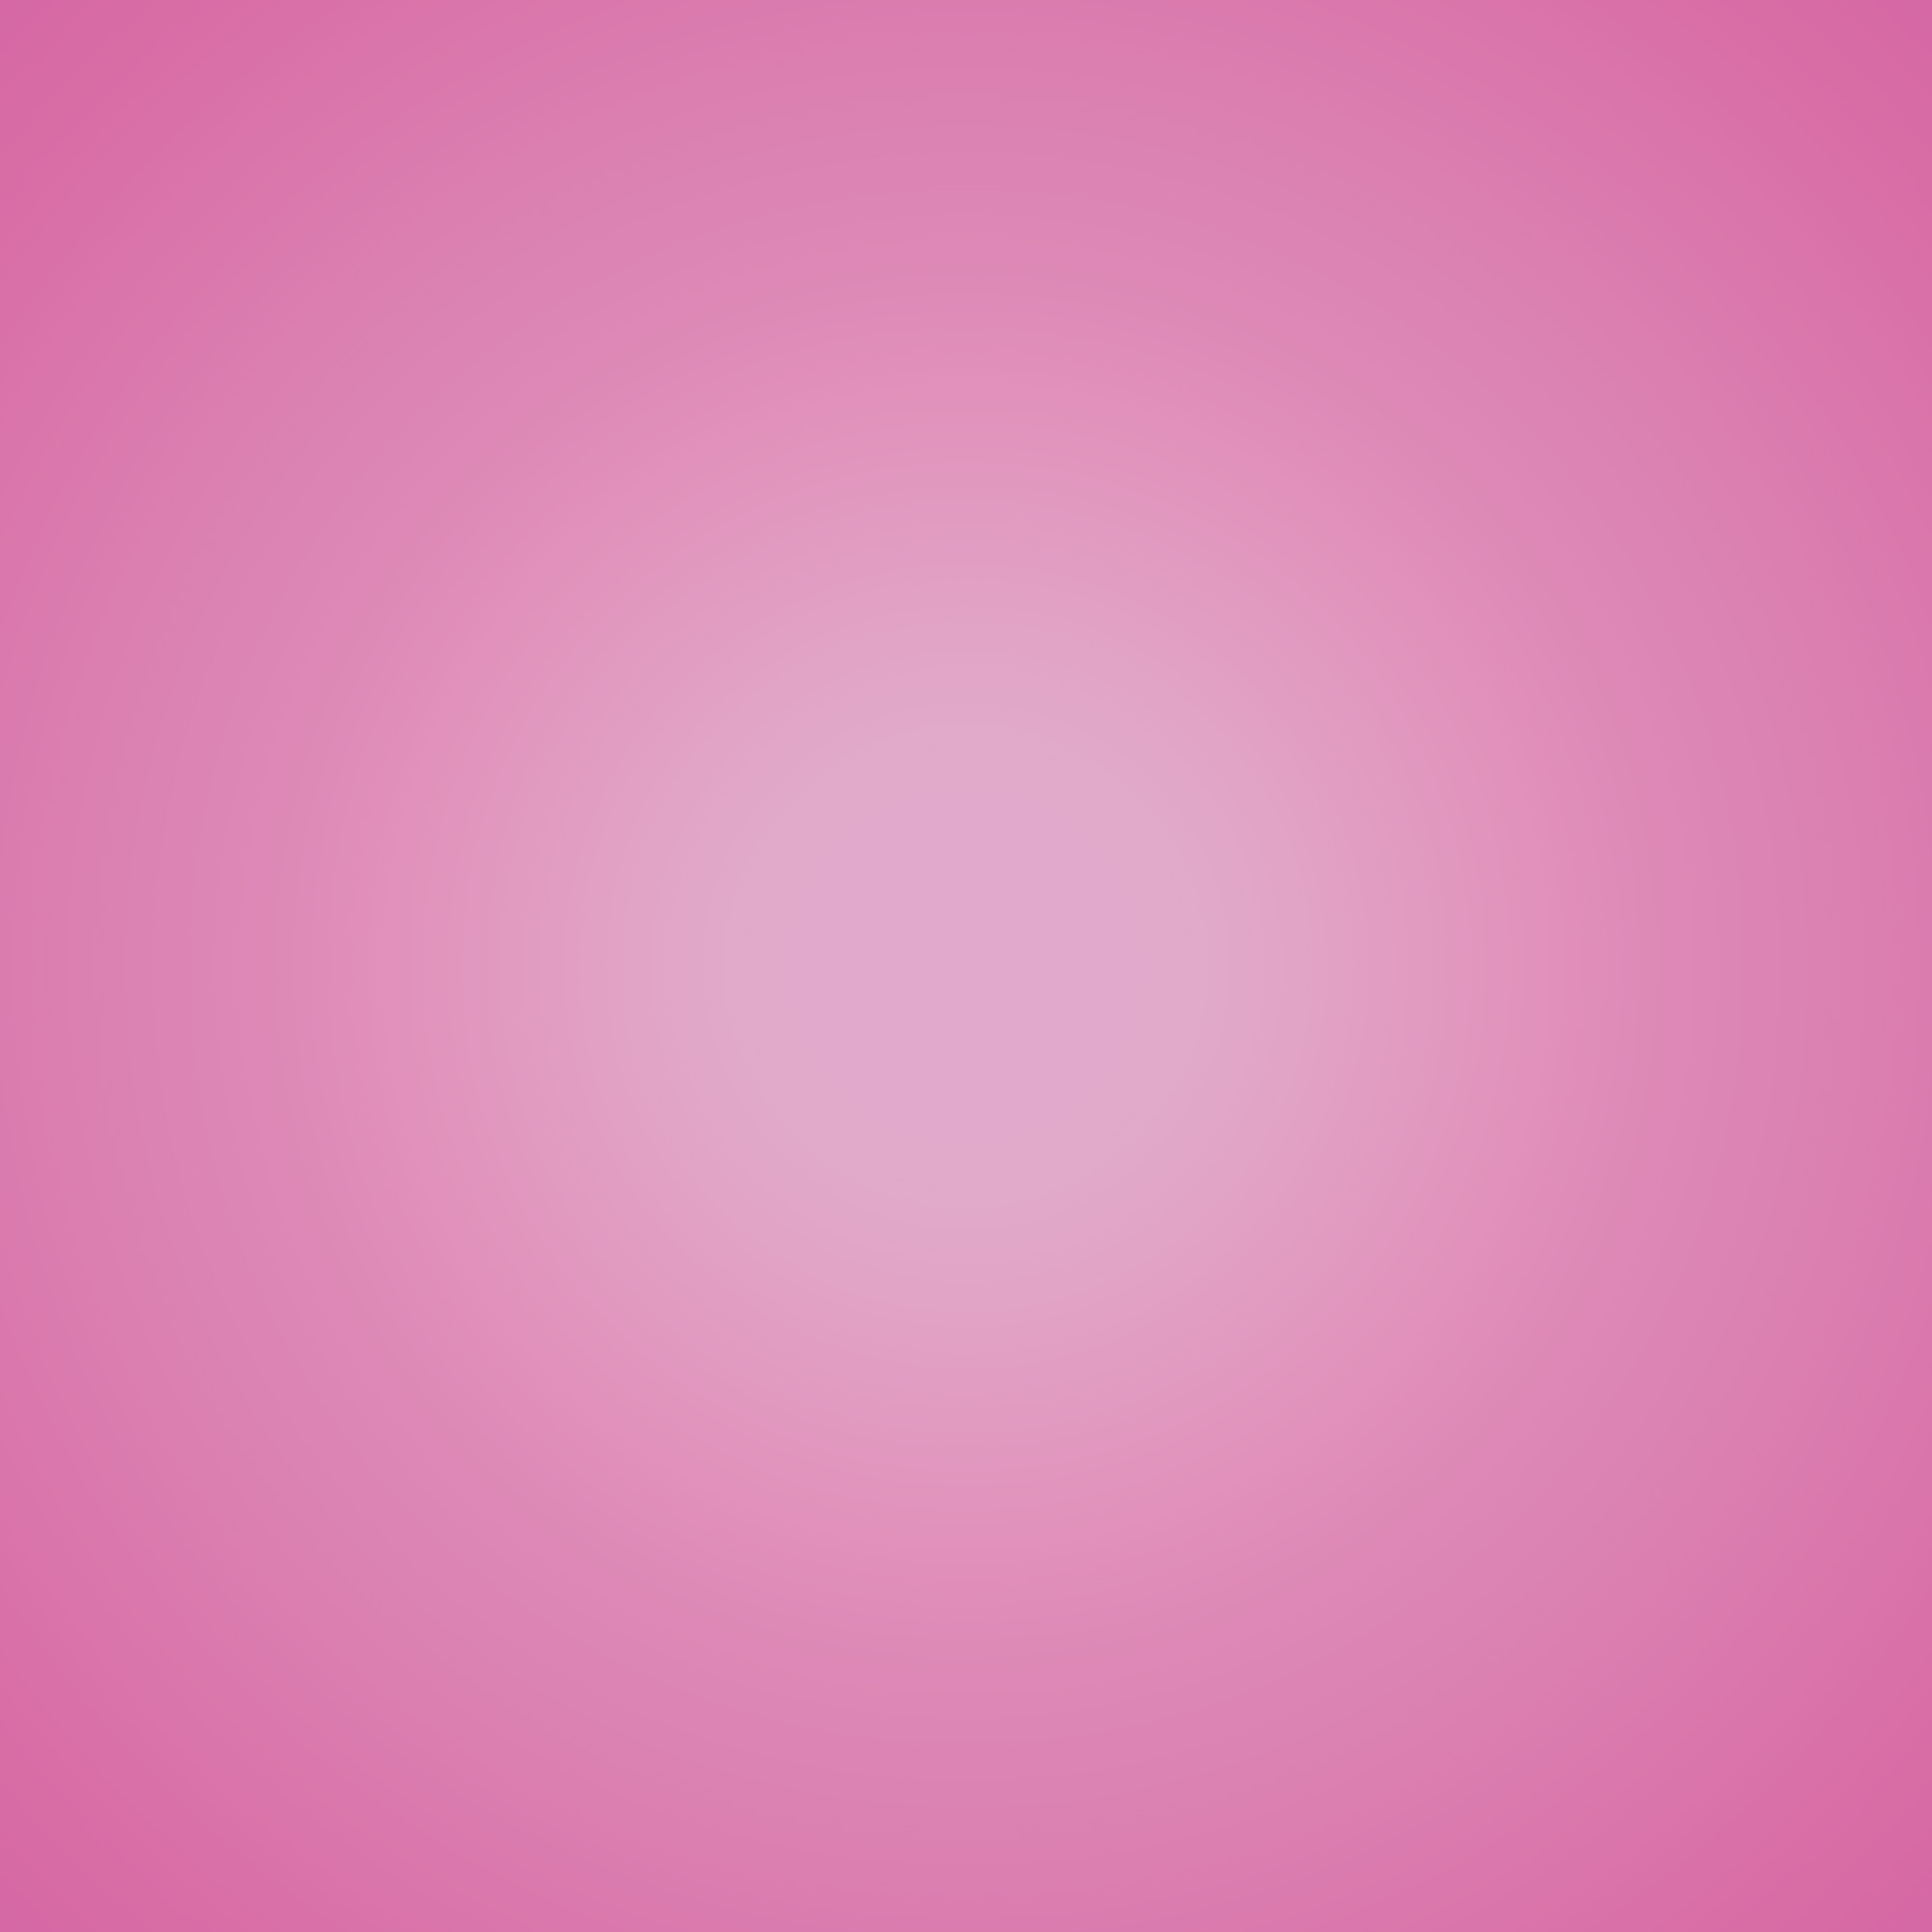 pink graphics background